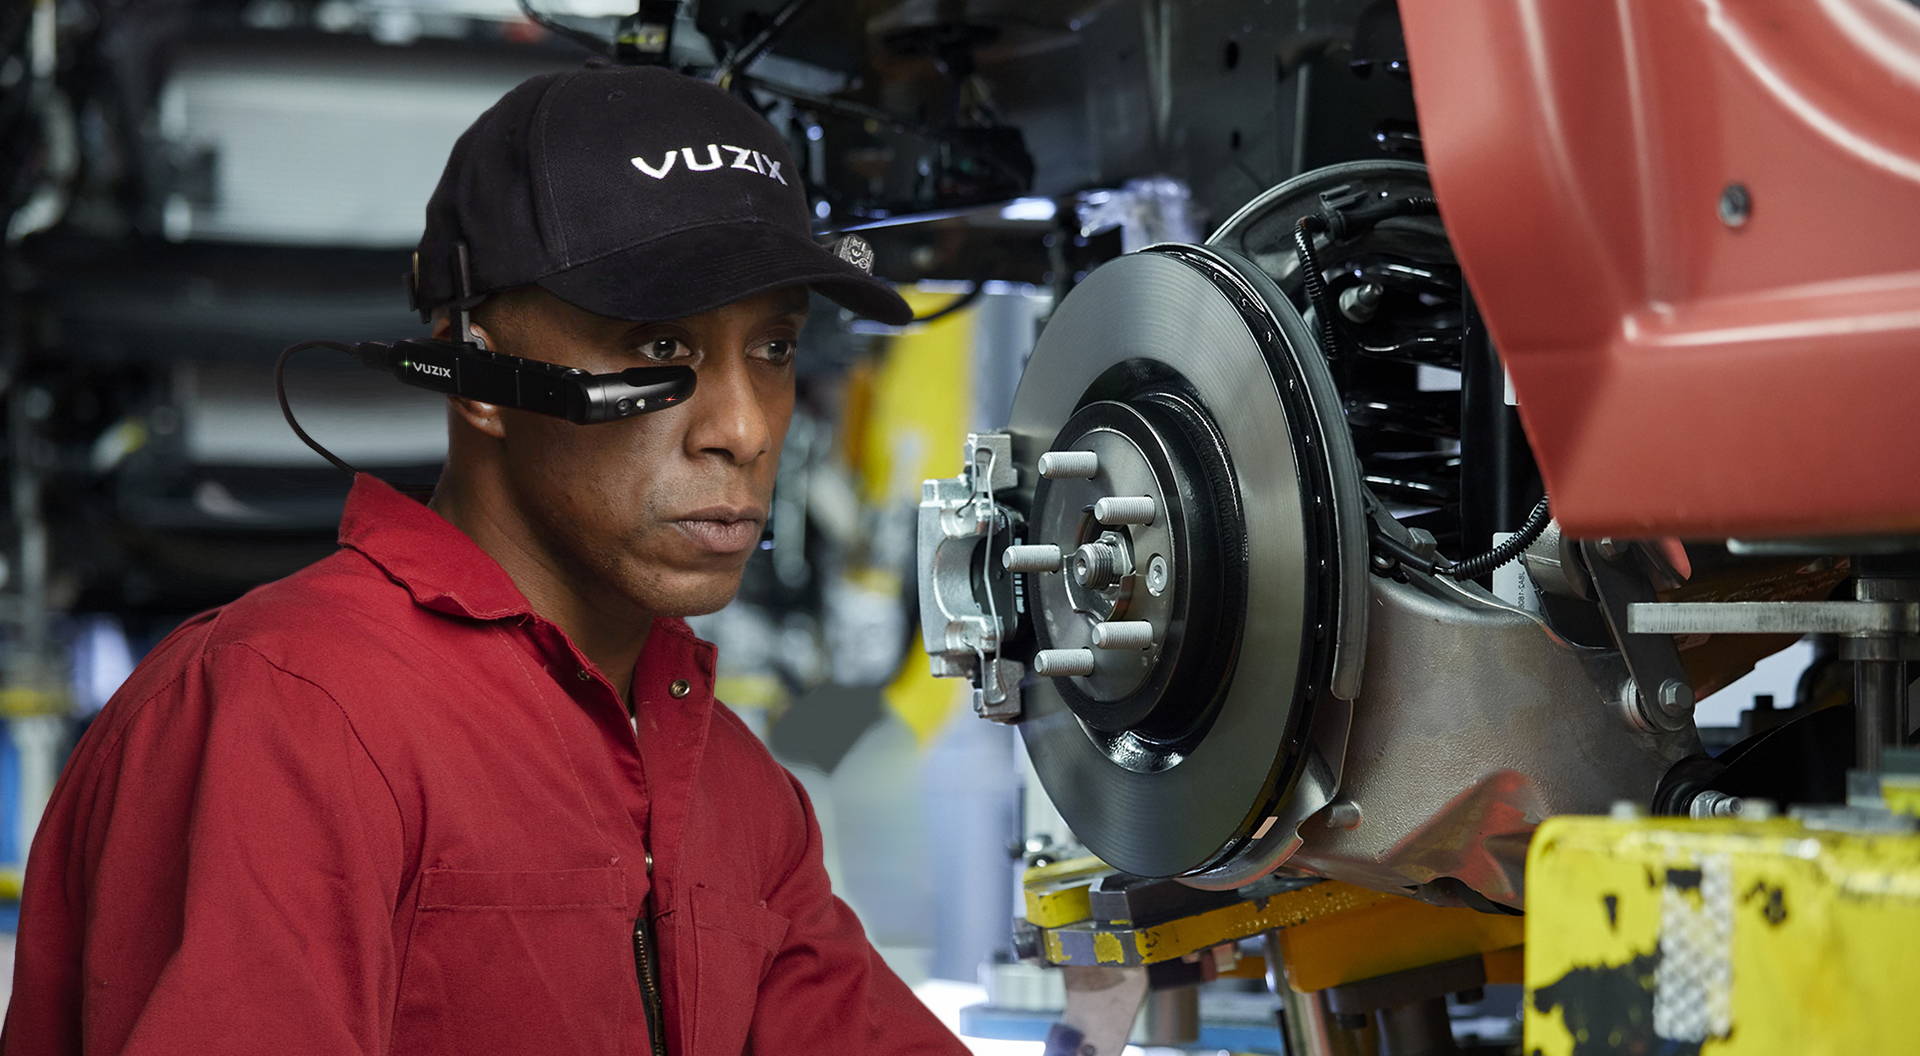 African American man in red collared shirt wearing Vuzix cap and smart glasses as he operates manufacturing equipment.